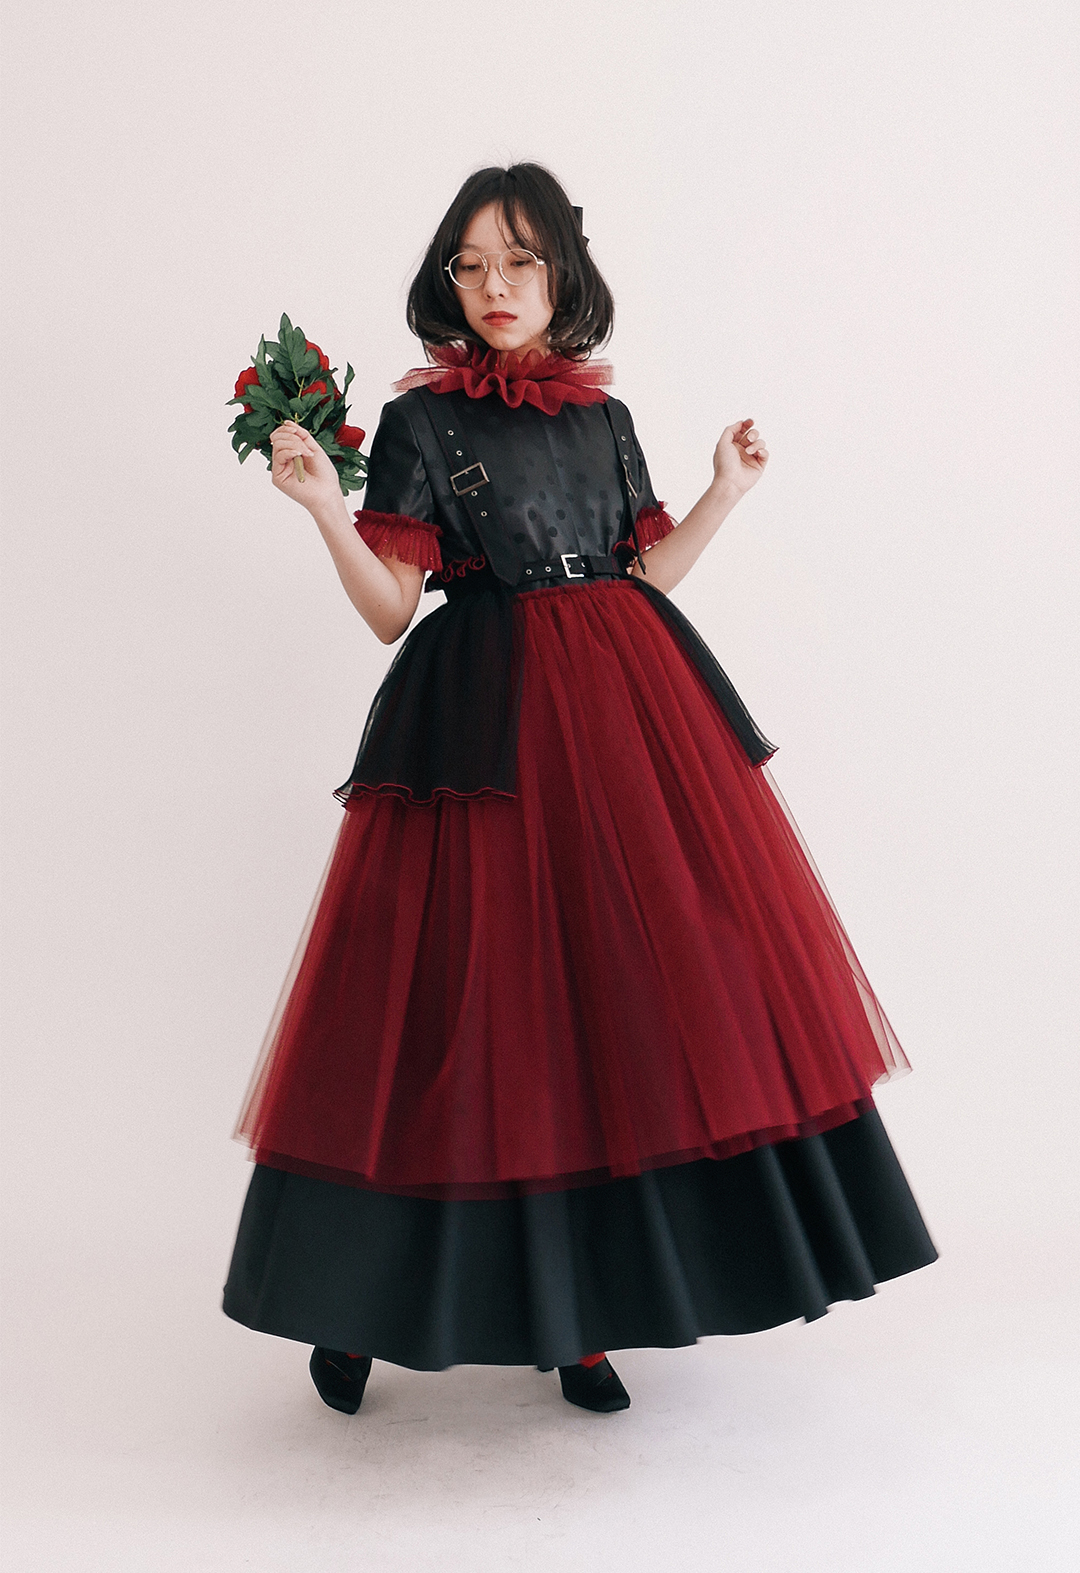 A front view of a model wearing the one-piece dress with suspenders, tulle skirt, and half of the harness. The model is holding a bouquet of roses.